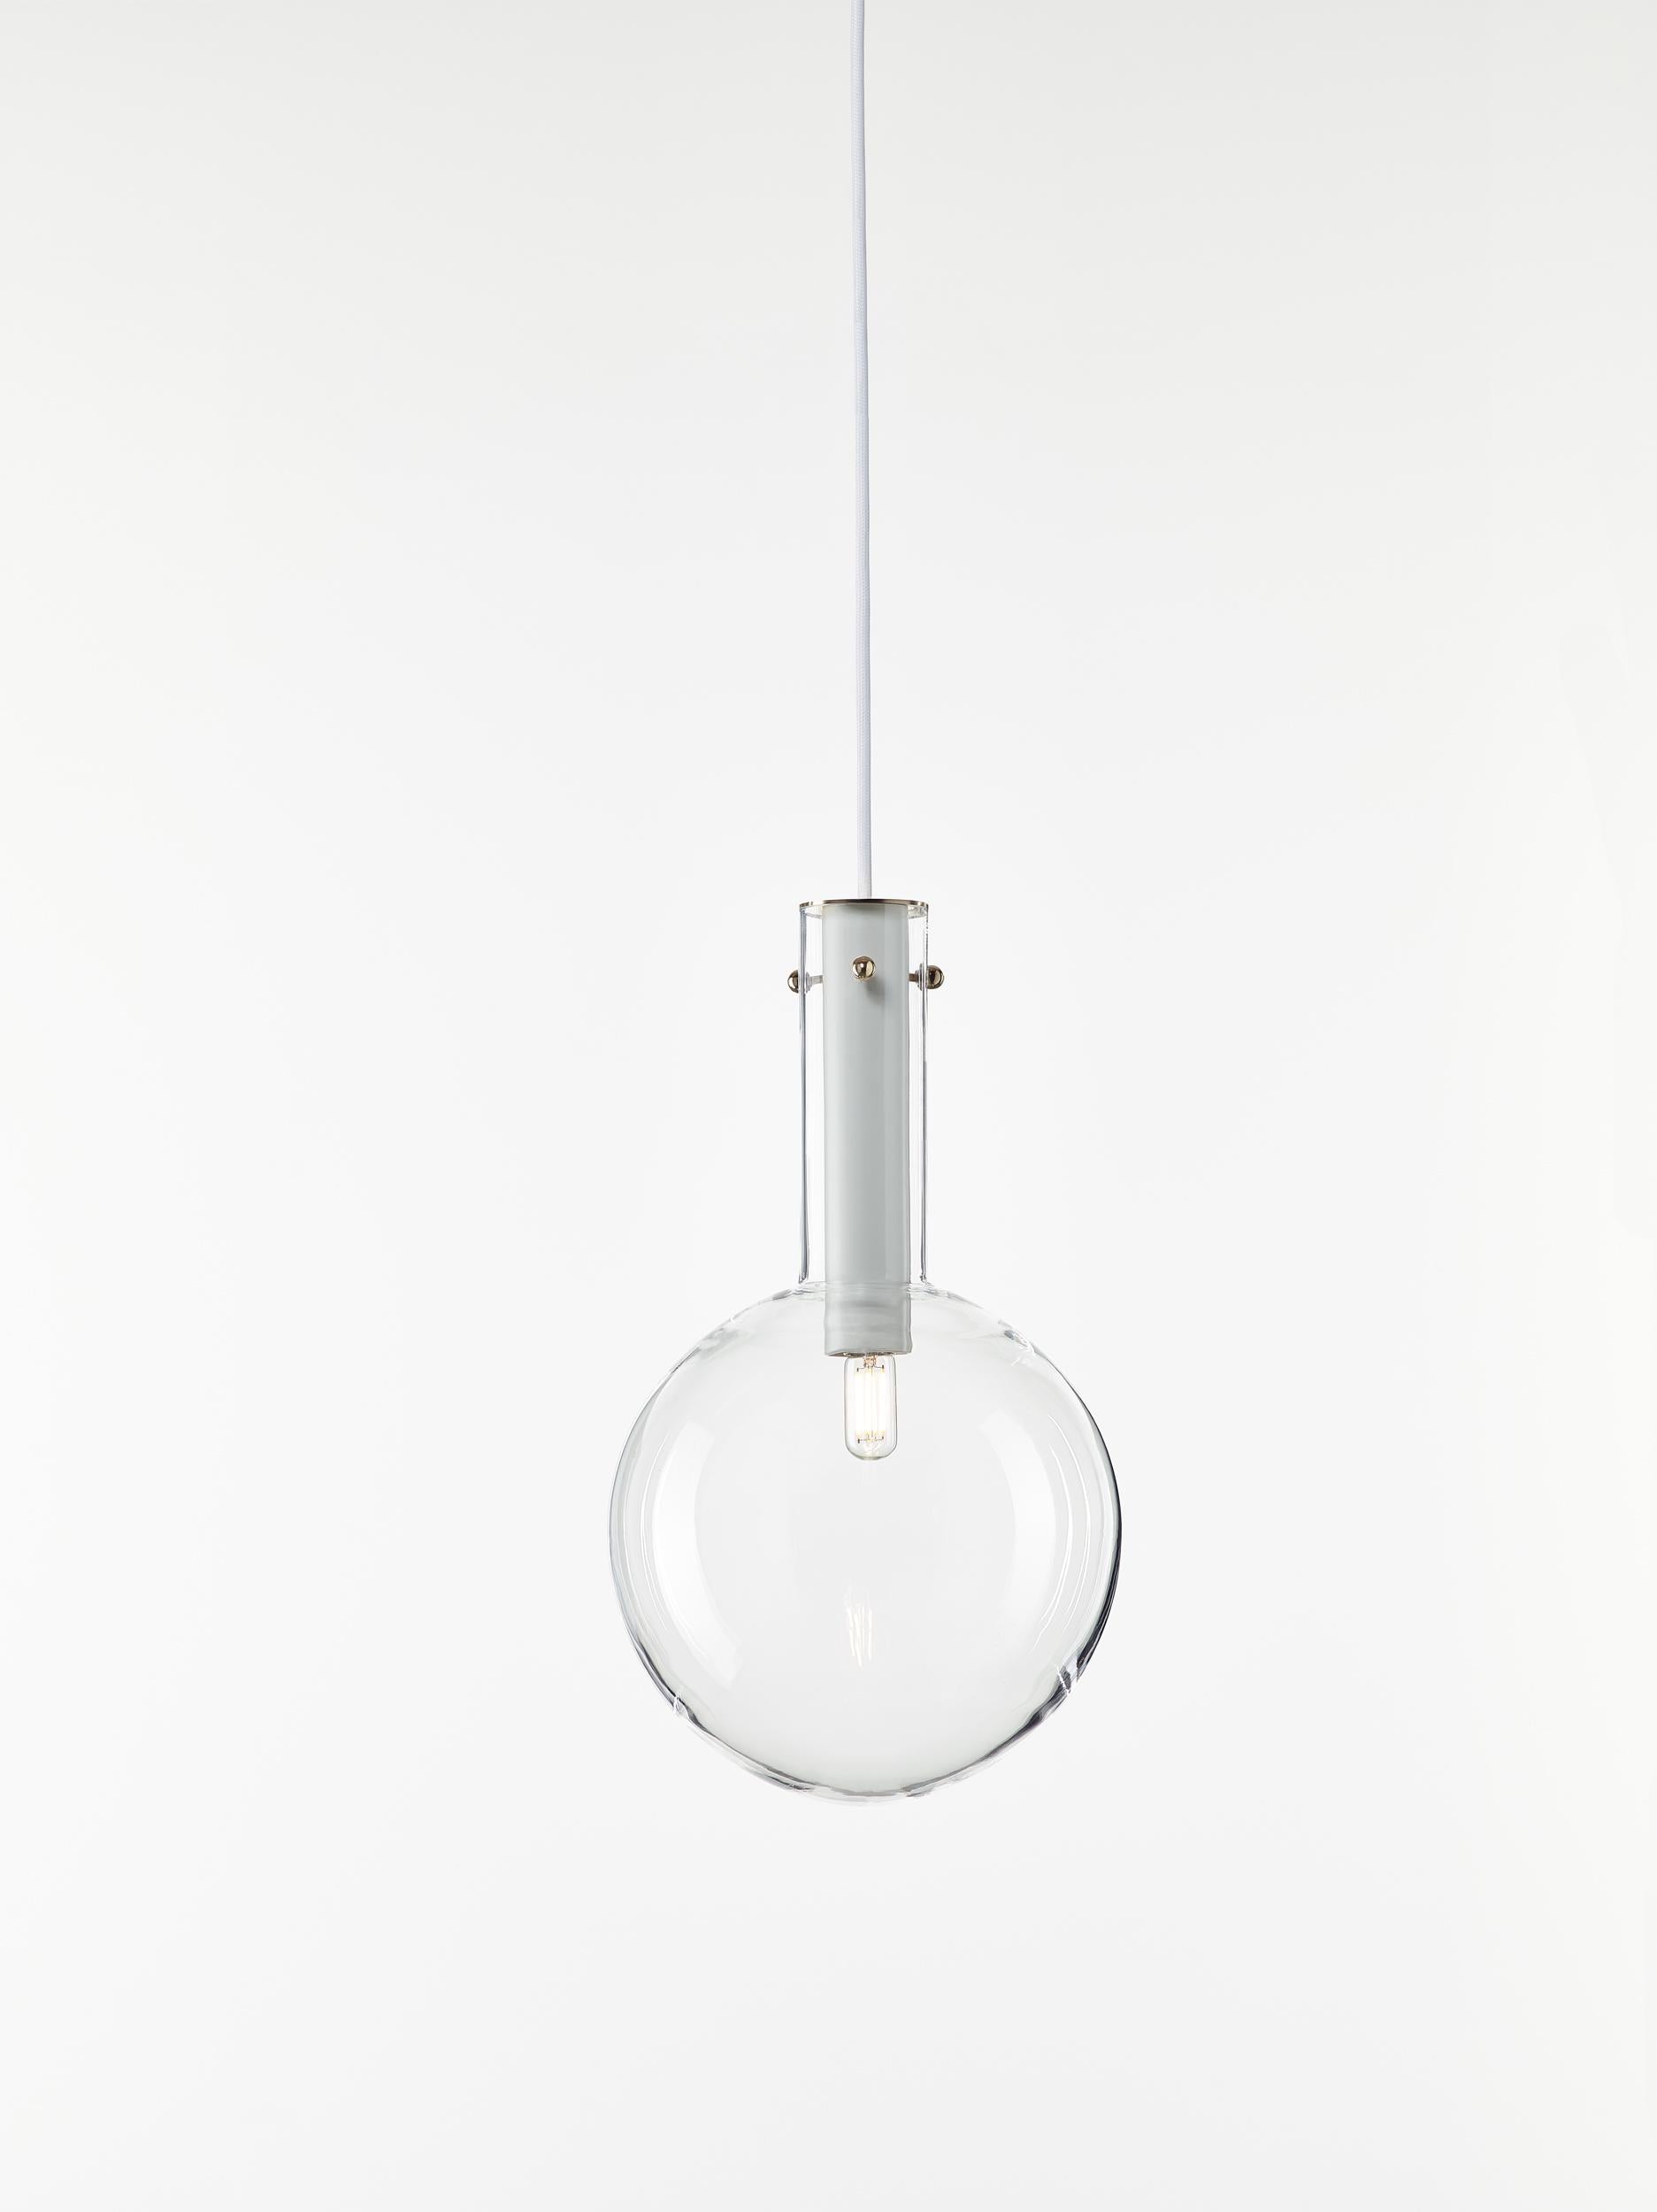 Clear Sphaerae pendant Light by Dechem Studio
Dimensions: D 20 x H 180 cm
Materials: brass, metal, glass.
Also available: different finishes and colors available.

Only one homogenous piece of hand-blown glass creates the main body of Sphaerae